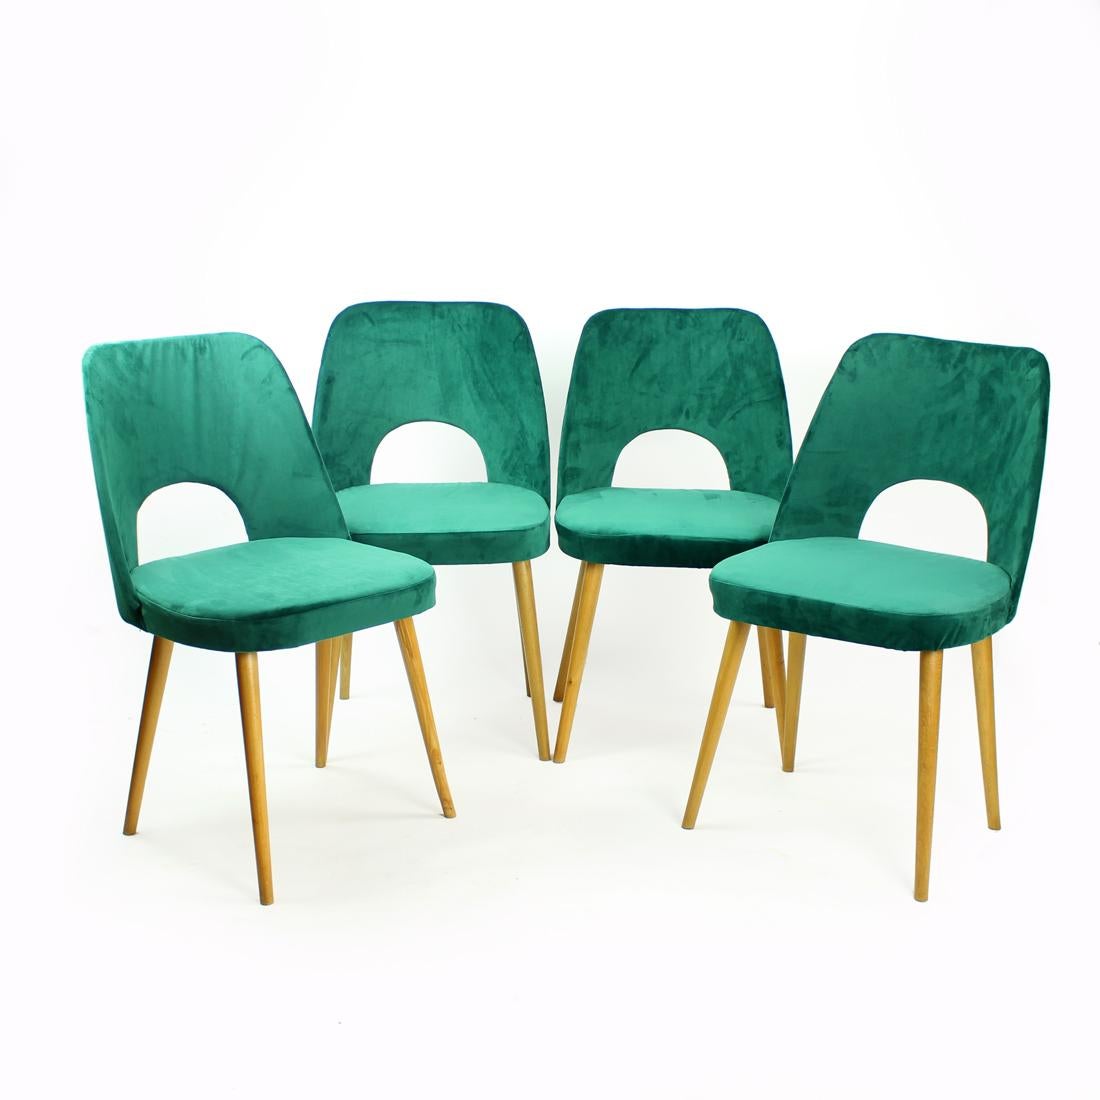 Beautiful set of 4 dining chairs in new velvet upholstery and after a complete restoration.
The chairs were designed by Oswald Haerdtl for TON (Thonet) in the 1950s, produced in Czechoslovakia.
Typical mid-century design. Backrest in bent plywood,